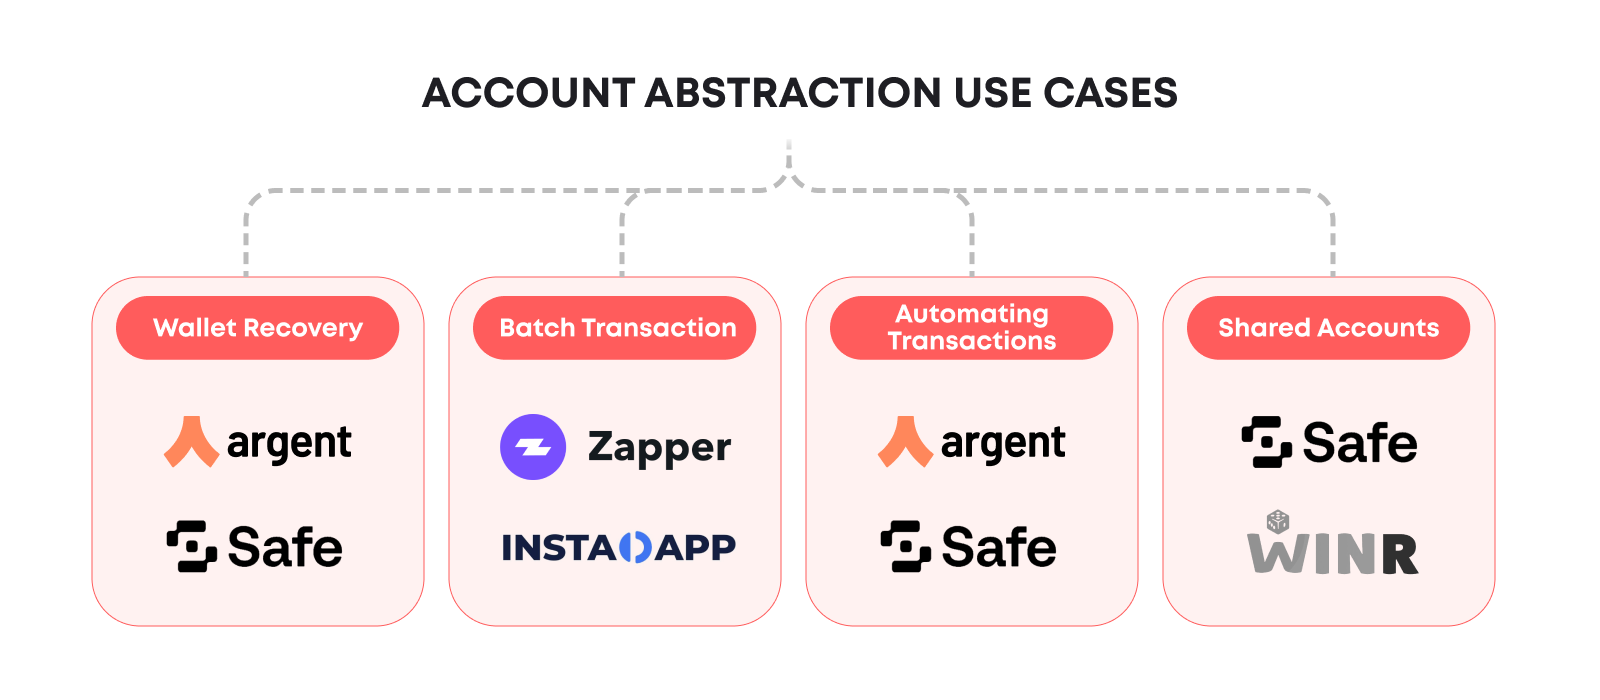 Account abstraction improves the existing ones and creates new possibilities for web3 adoption via various use cases.